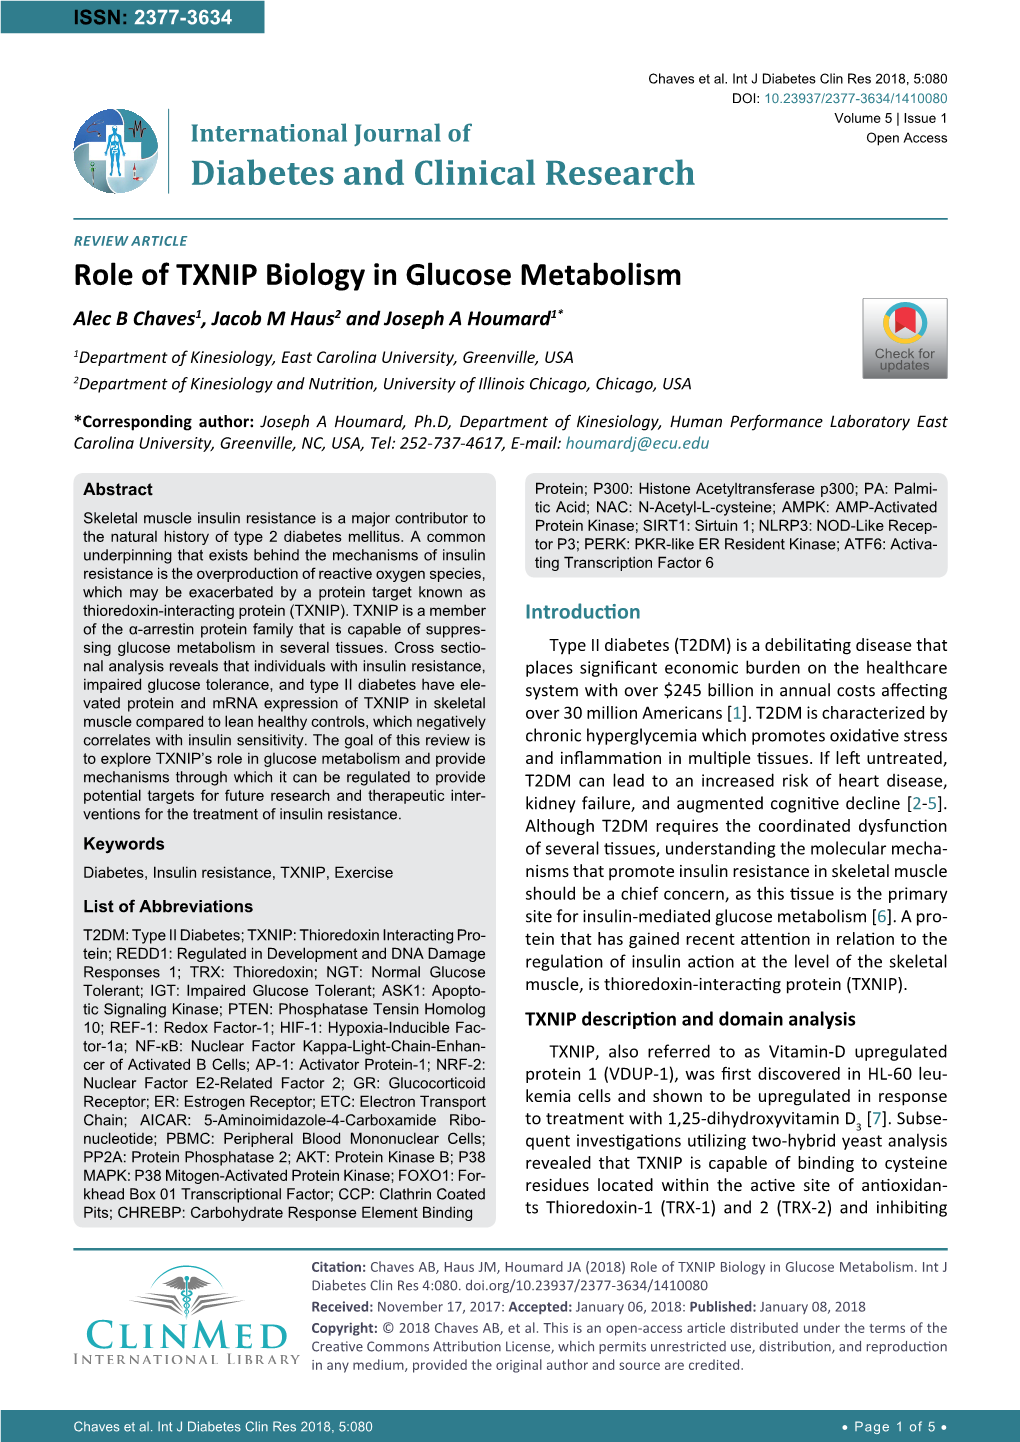 Role of TXNIP Biology in Glucose Metabolism Alec B Chaves1, Jacob M Haus2 and Joseph a Houmard1*